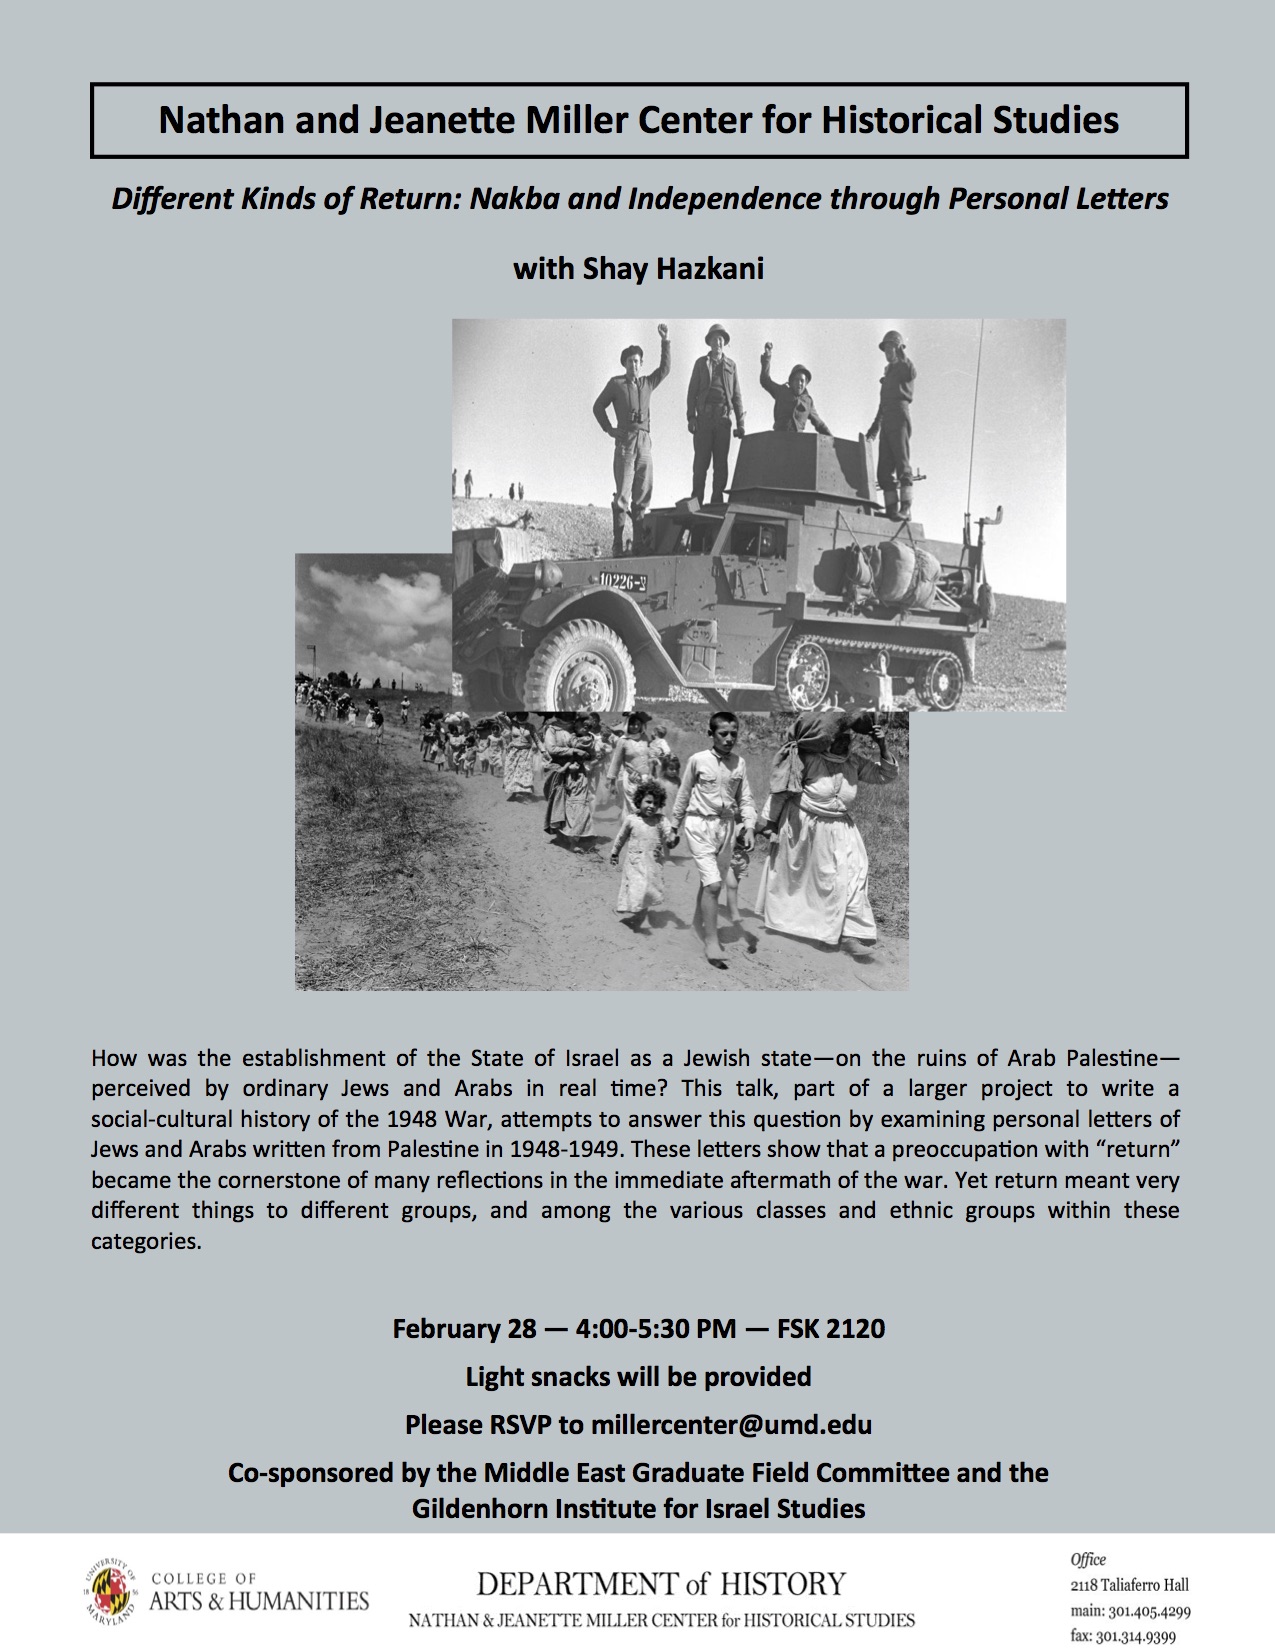 Image for event - Different Kinds of Return: Nakba and Independence through Personal Letters